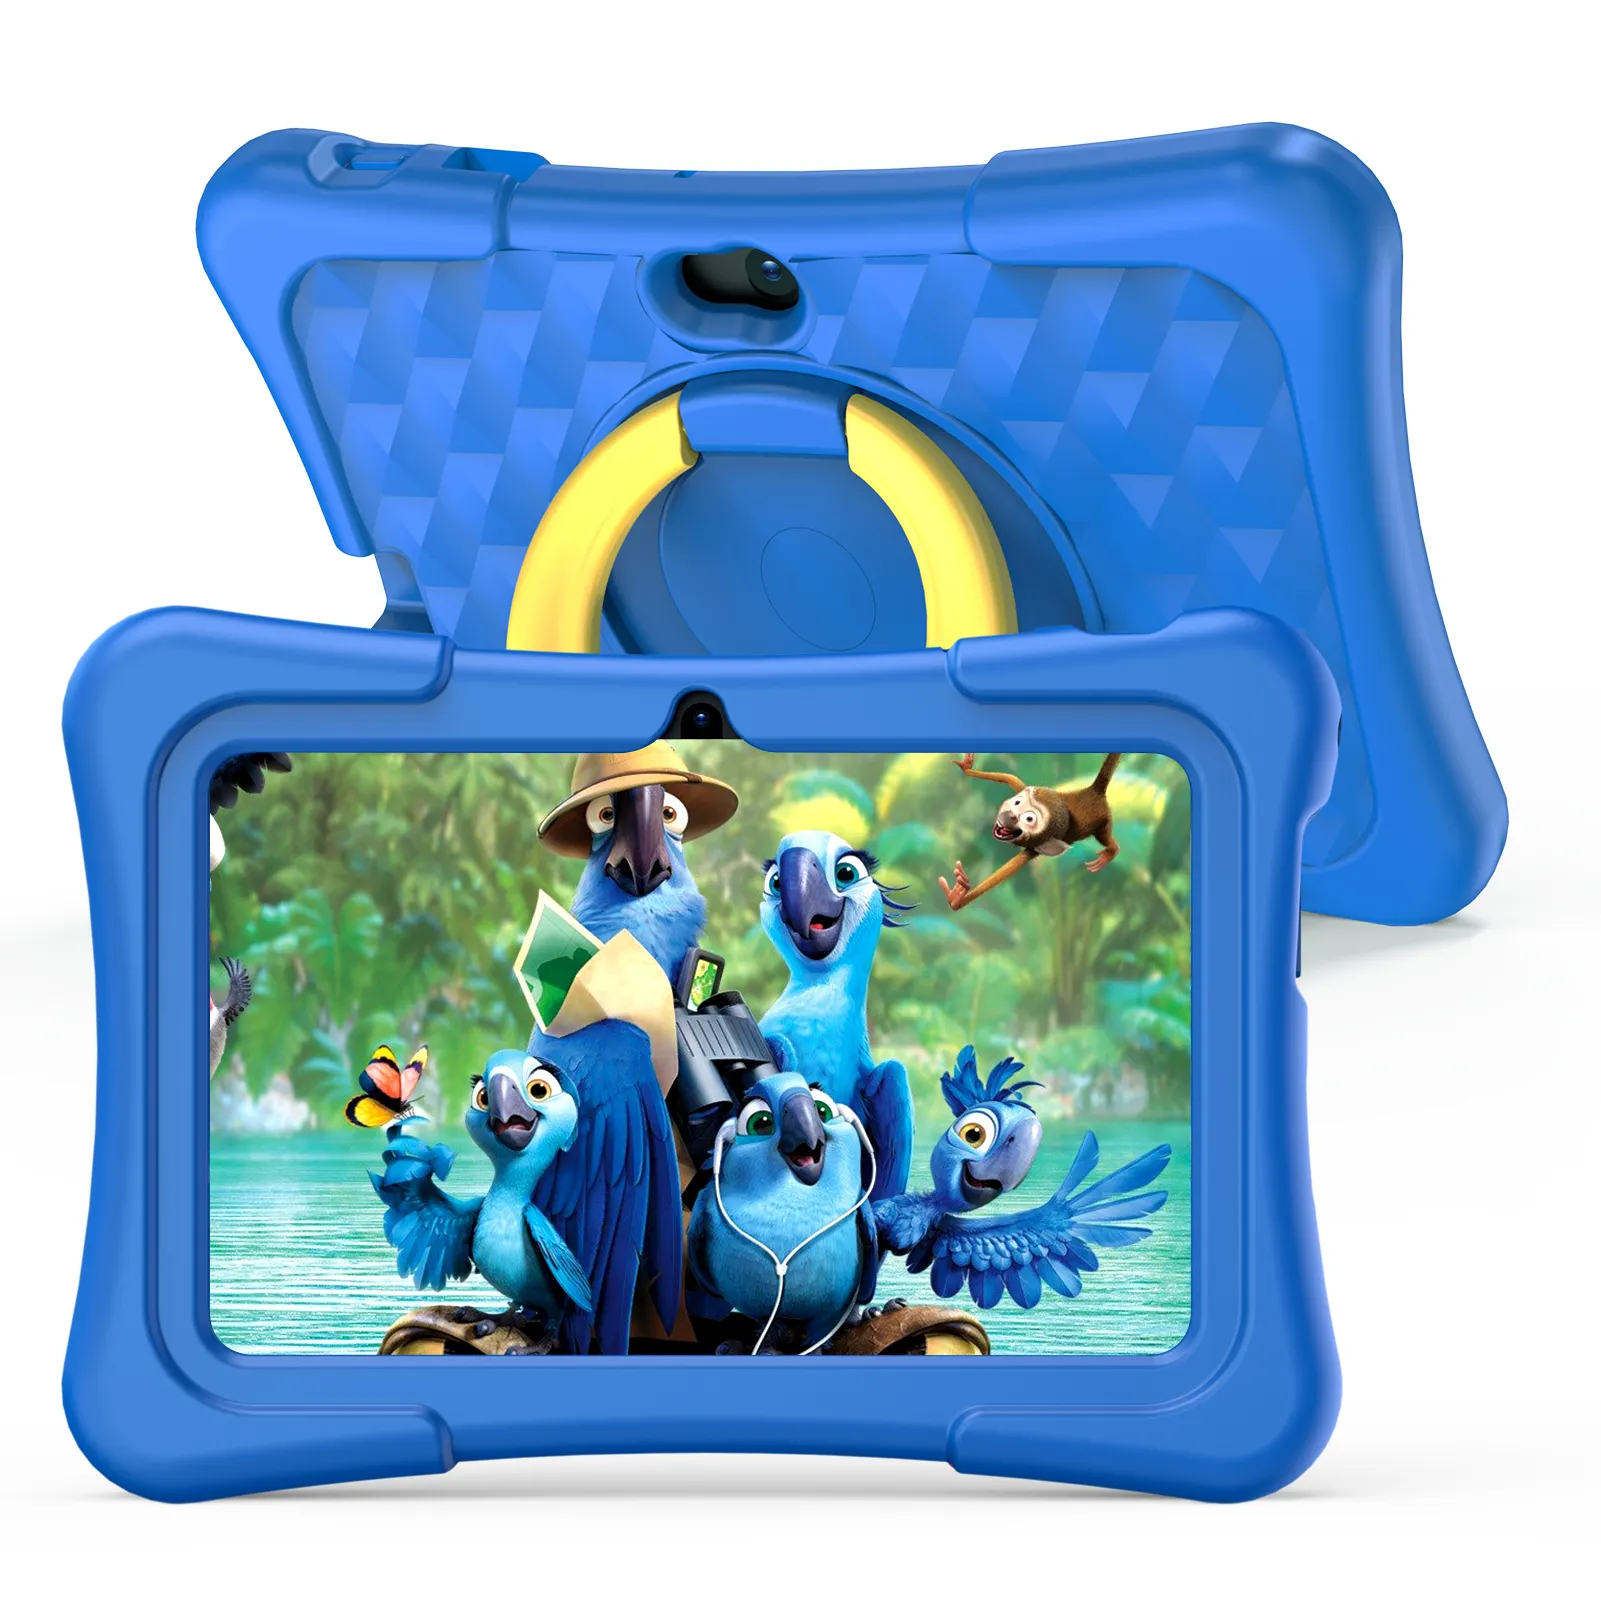 7inch Kids Tablet with Ipad and Android Tablet Pc for Kids